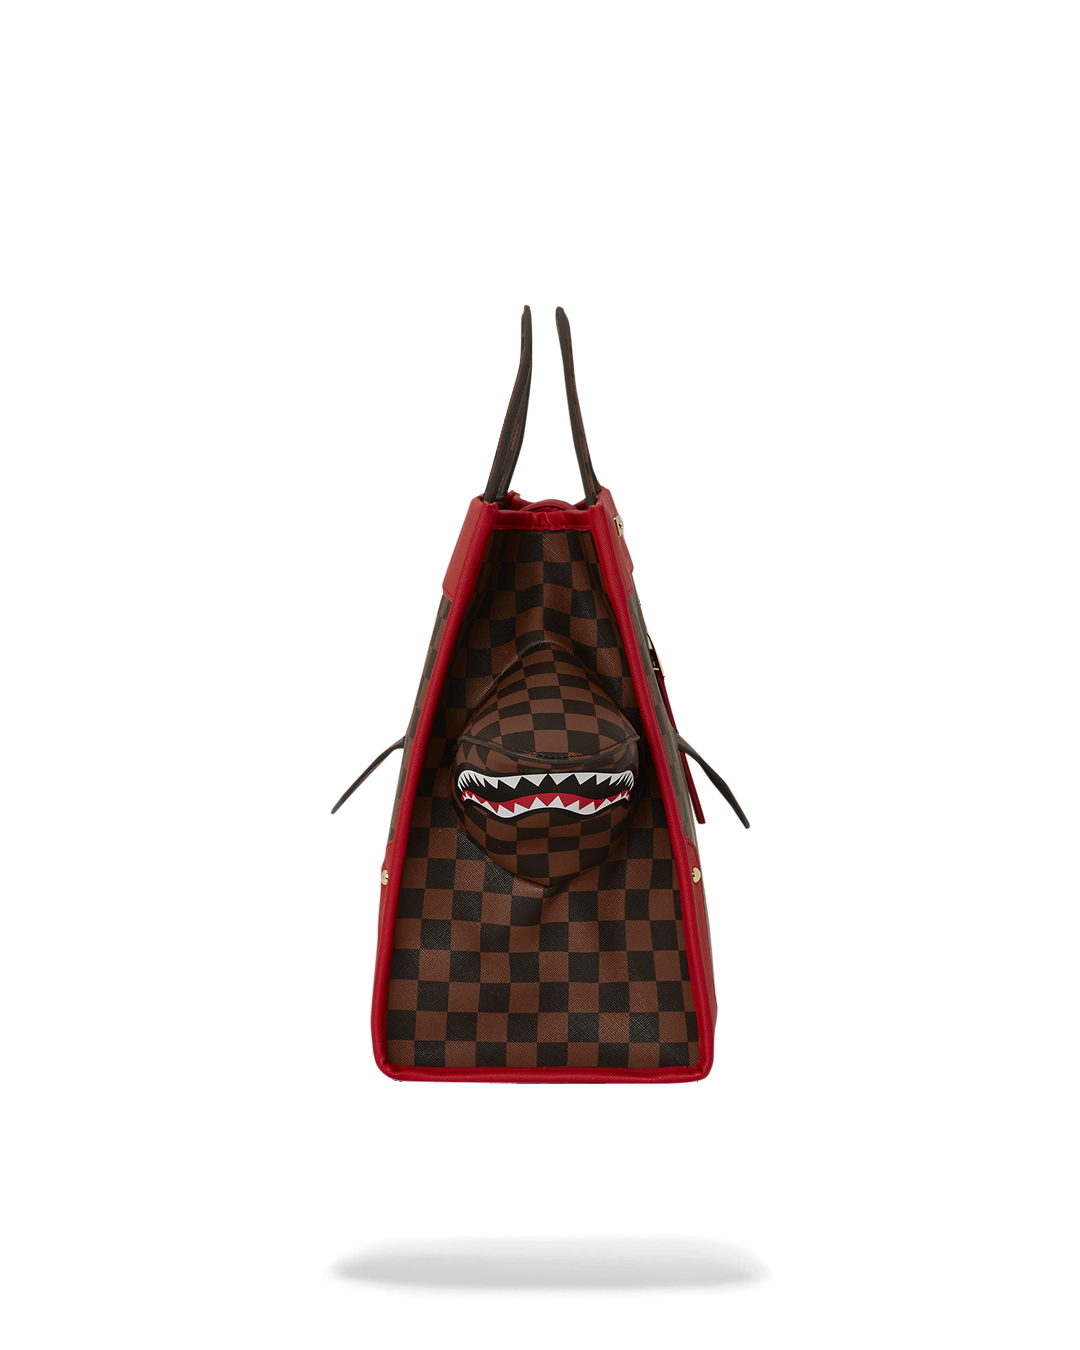 All or Nothing Sharks in Paris Mini Duffle